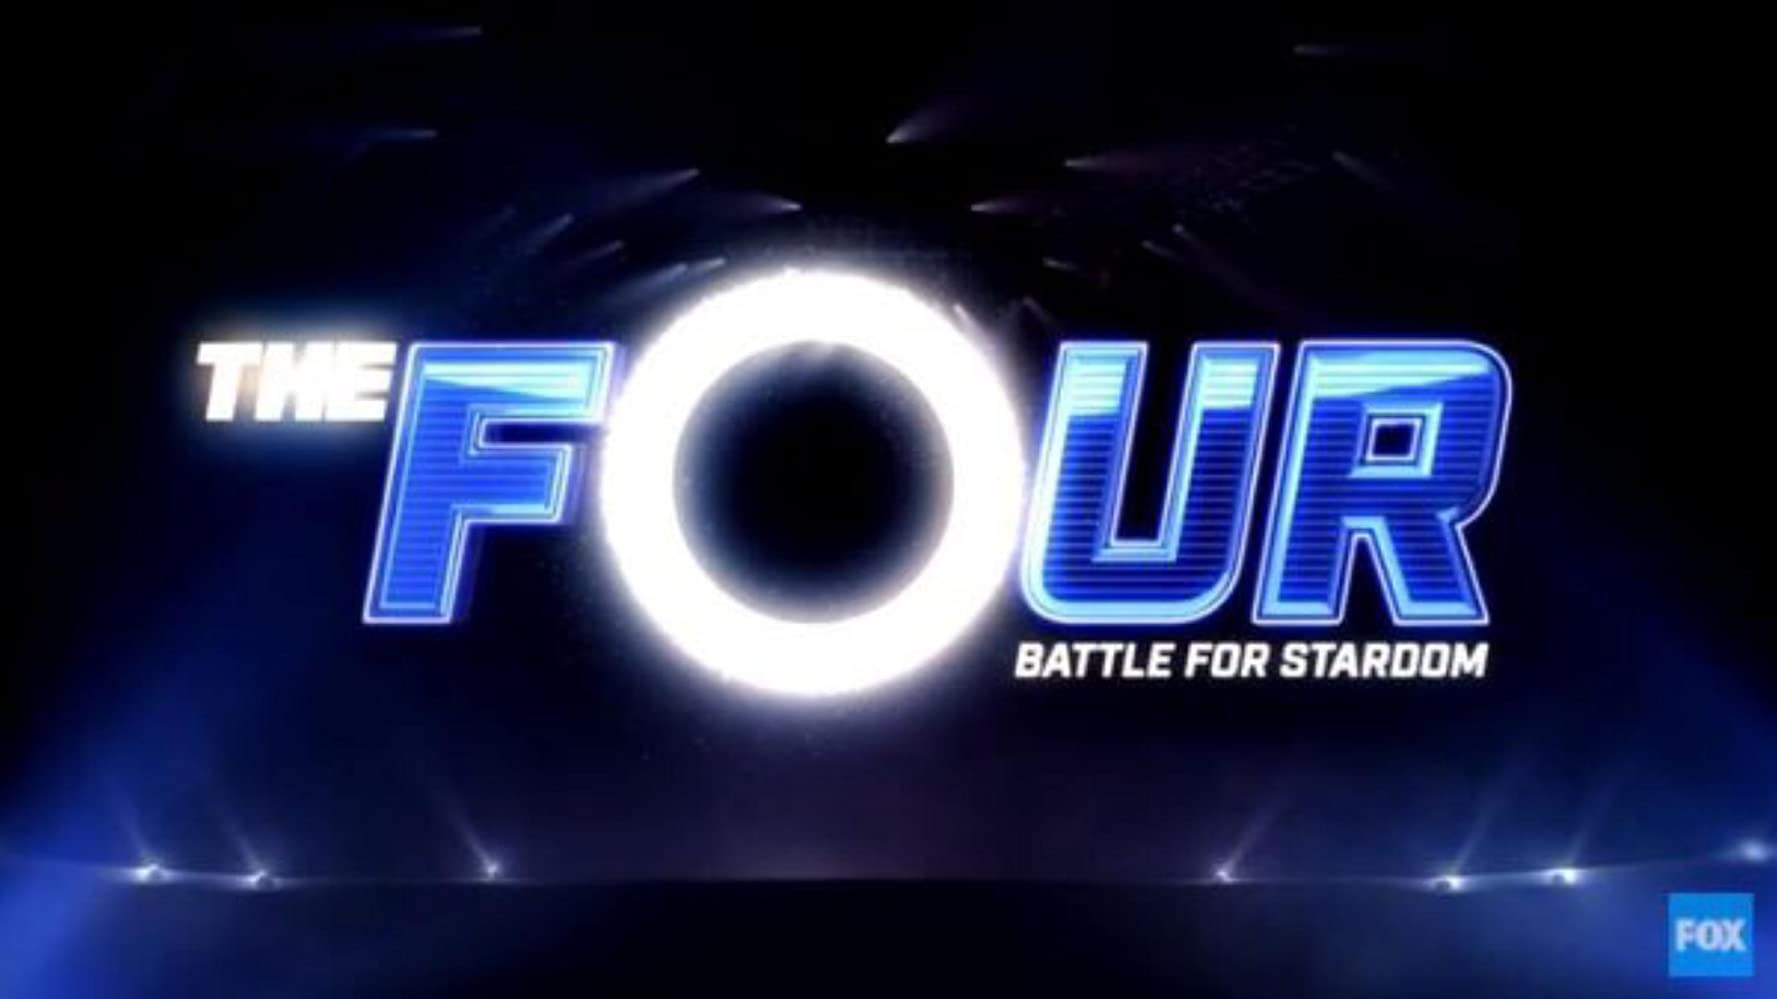 Show The Four: Battle for Stardom